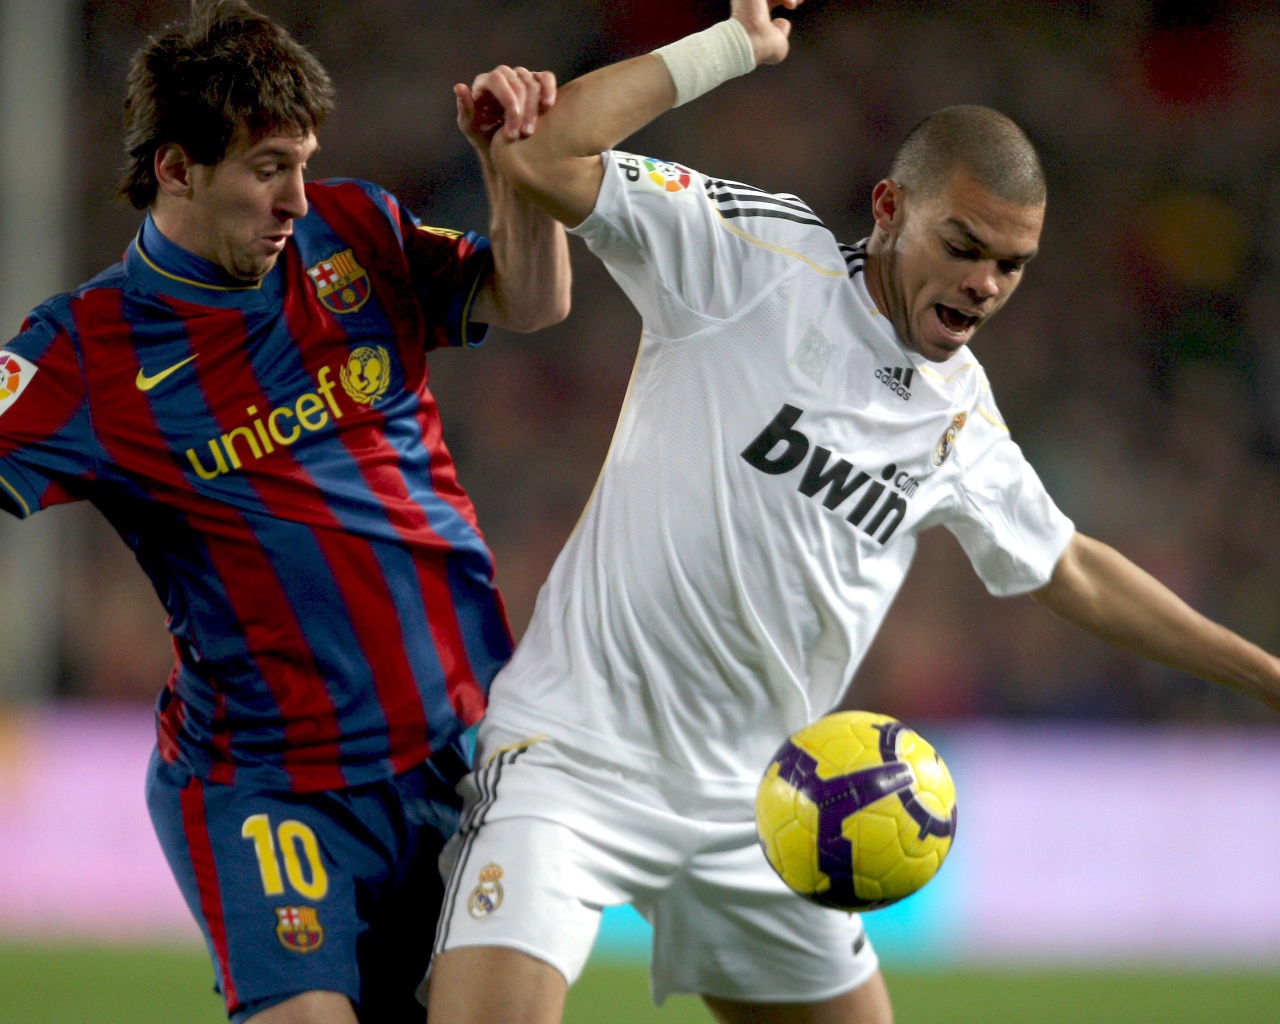 Real Madrid Pepe is fighting for the ball